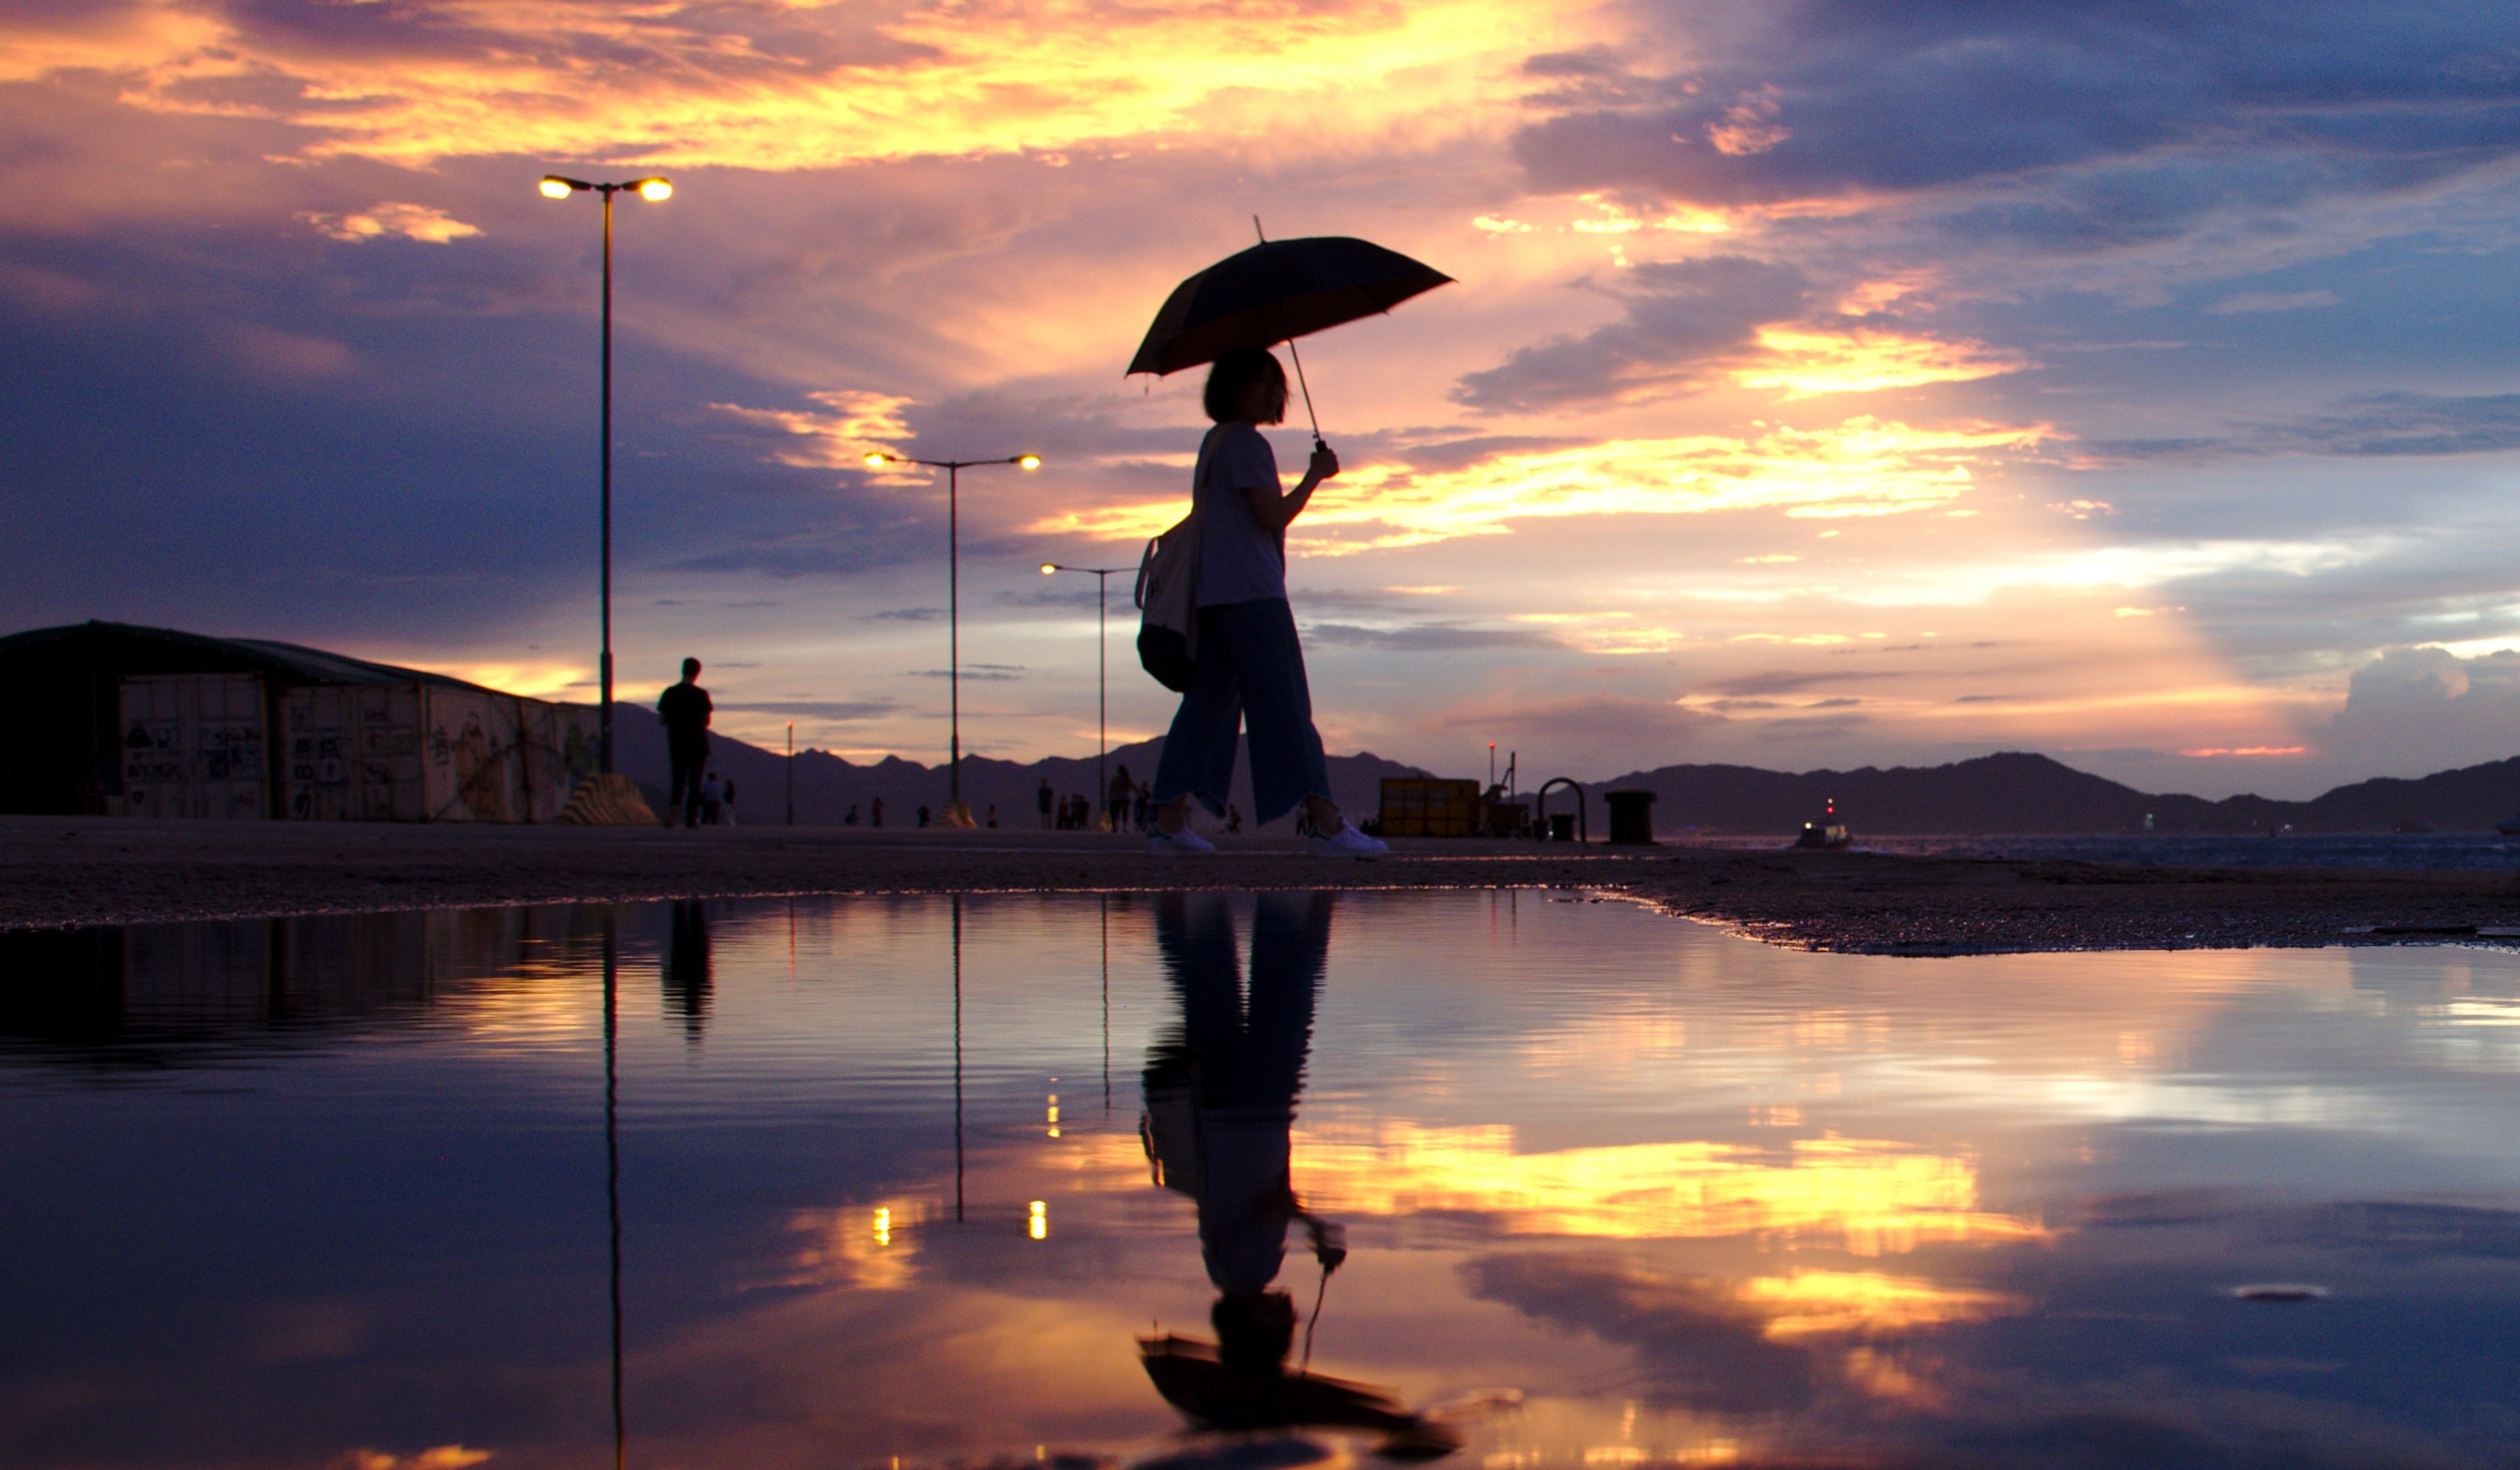 A backlit figure stands holding an umbrella at sunset. The yellows and blues of the sky are reflected in the ground which is wet after rain.